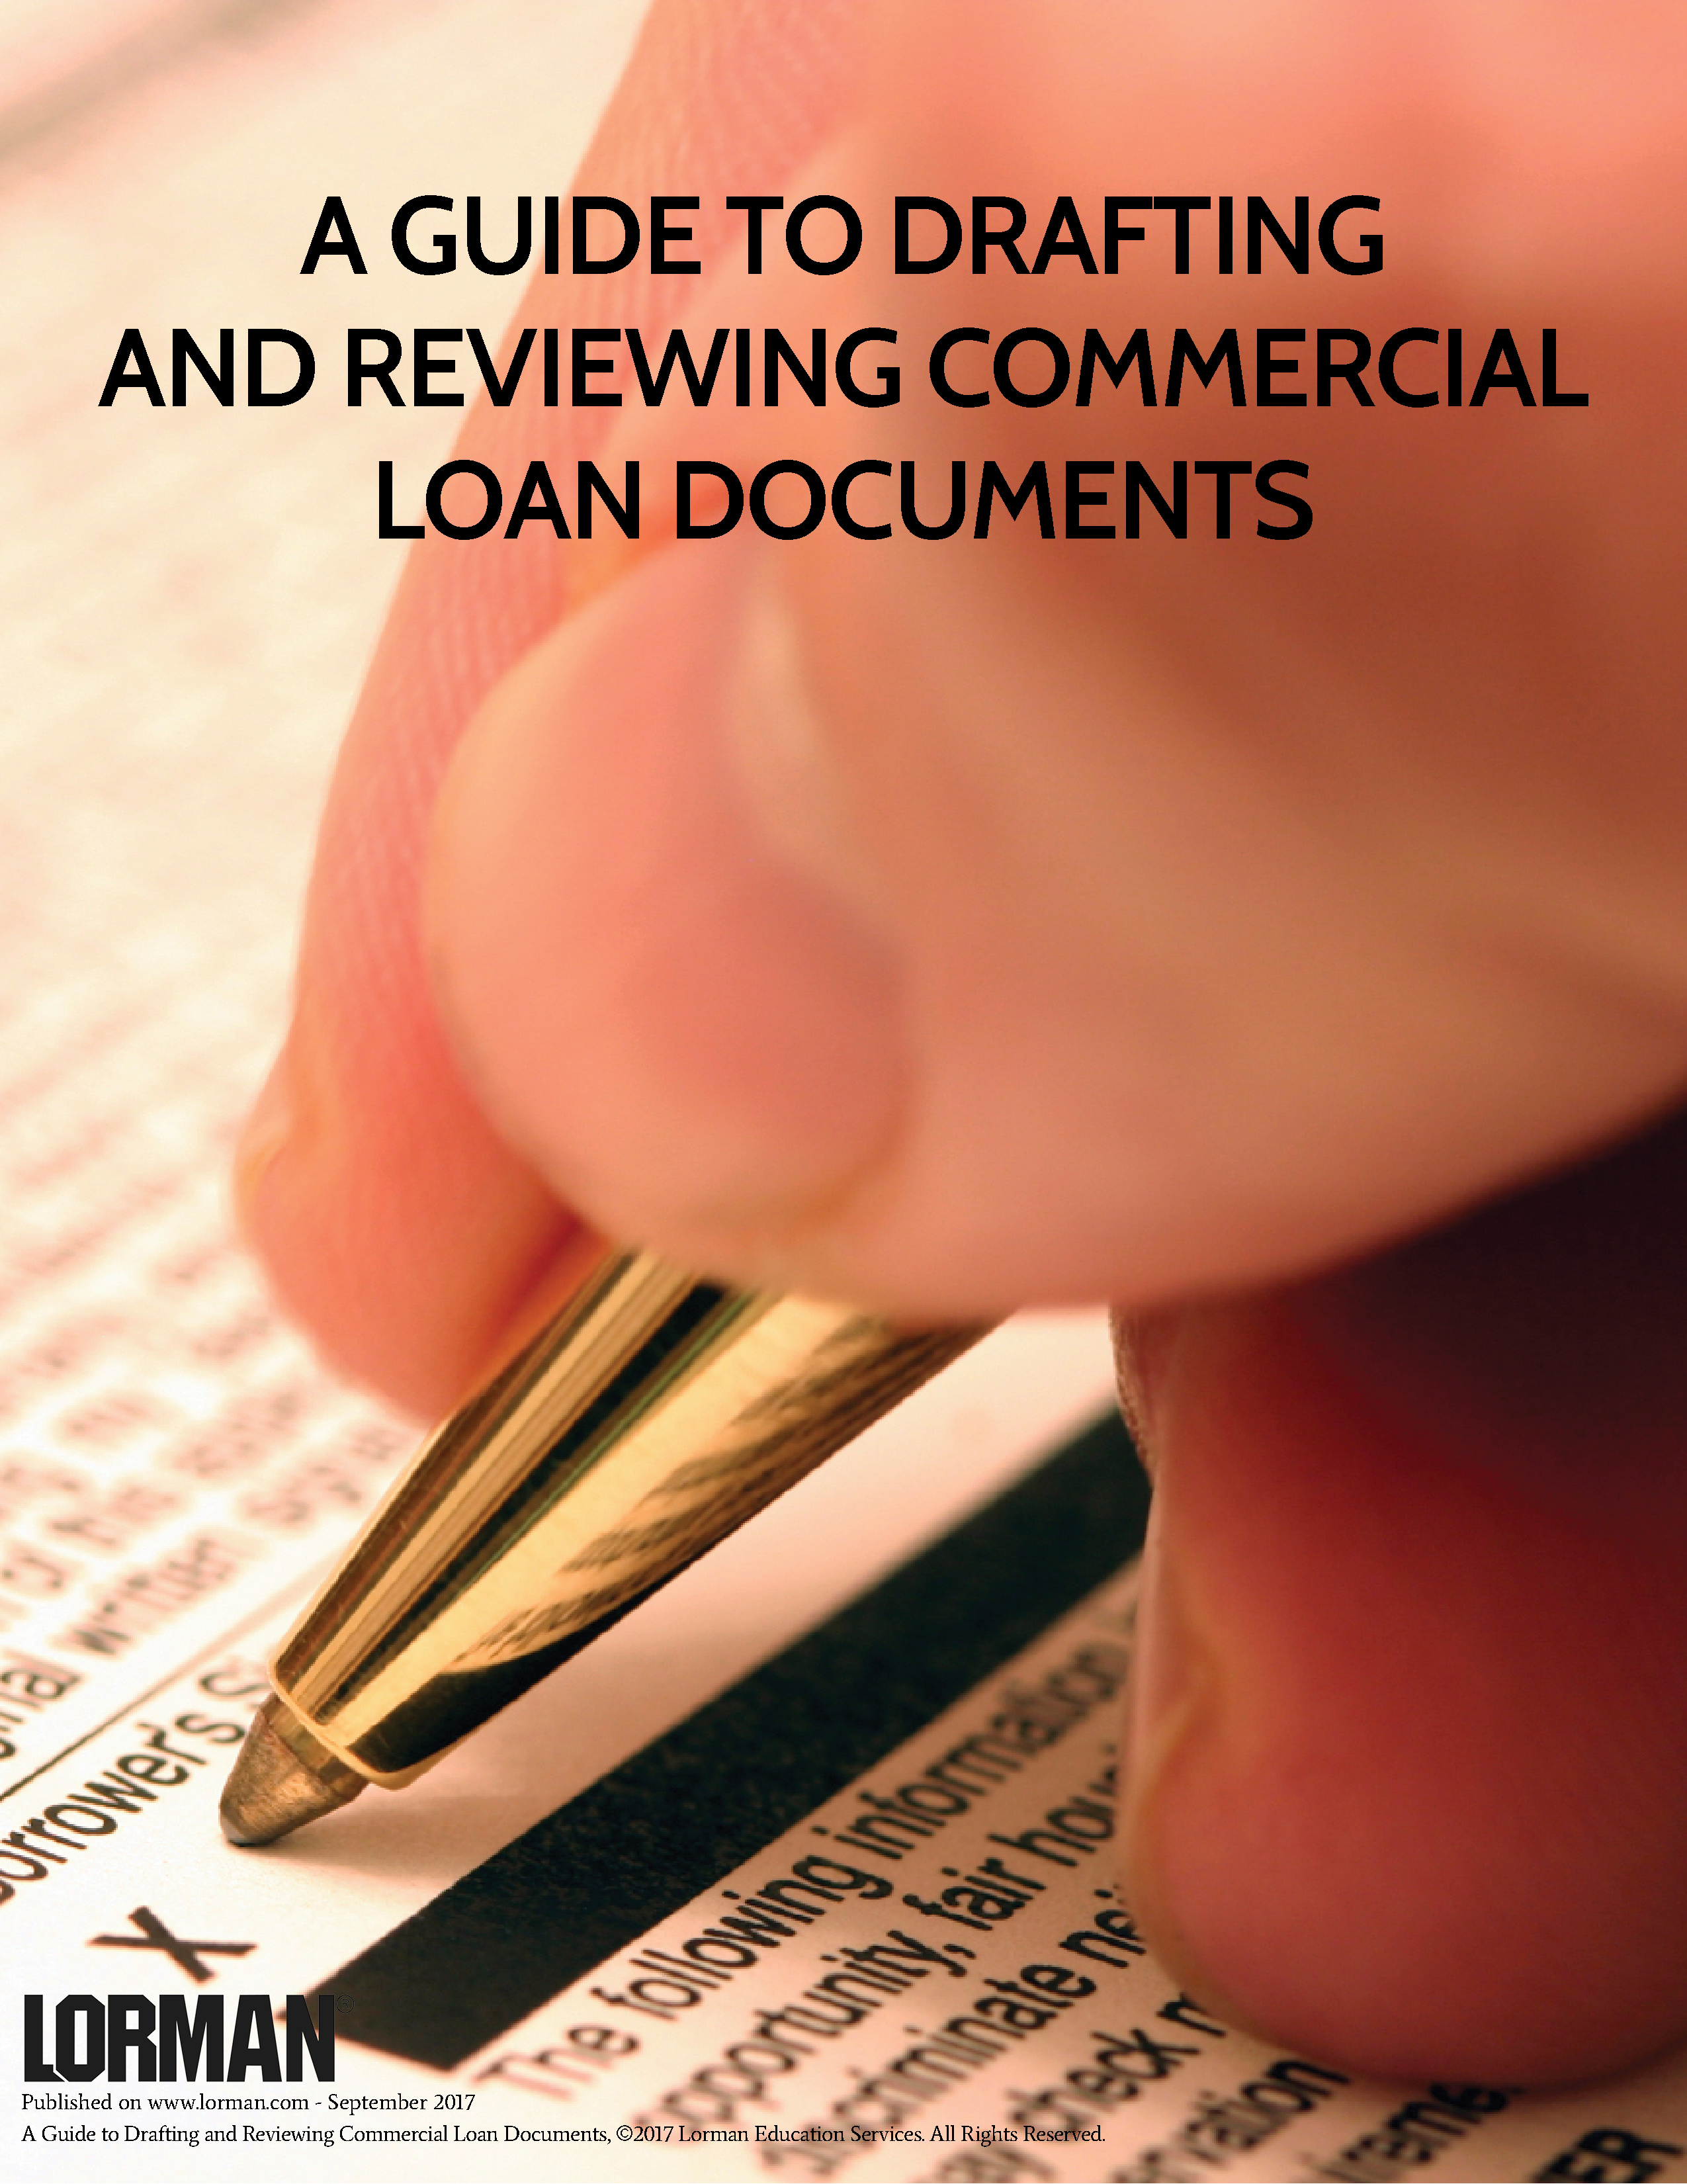 A Guide to Drafting and Reviewing Commercial Loan Documents